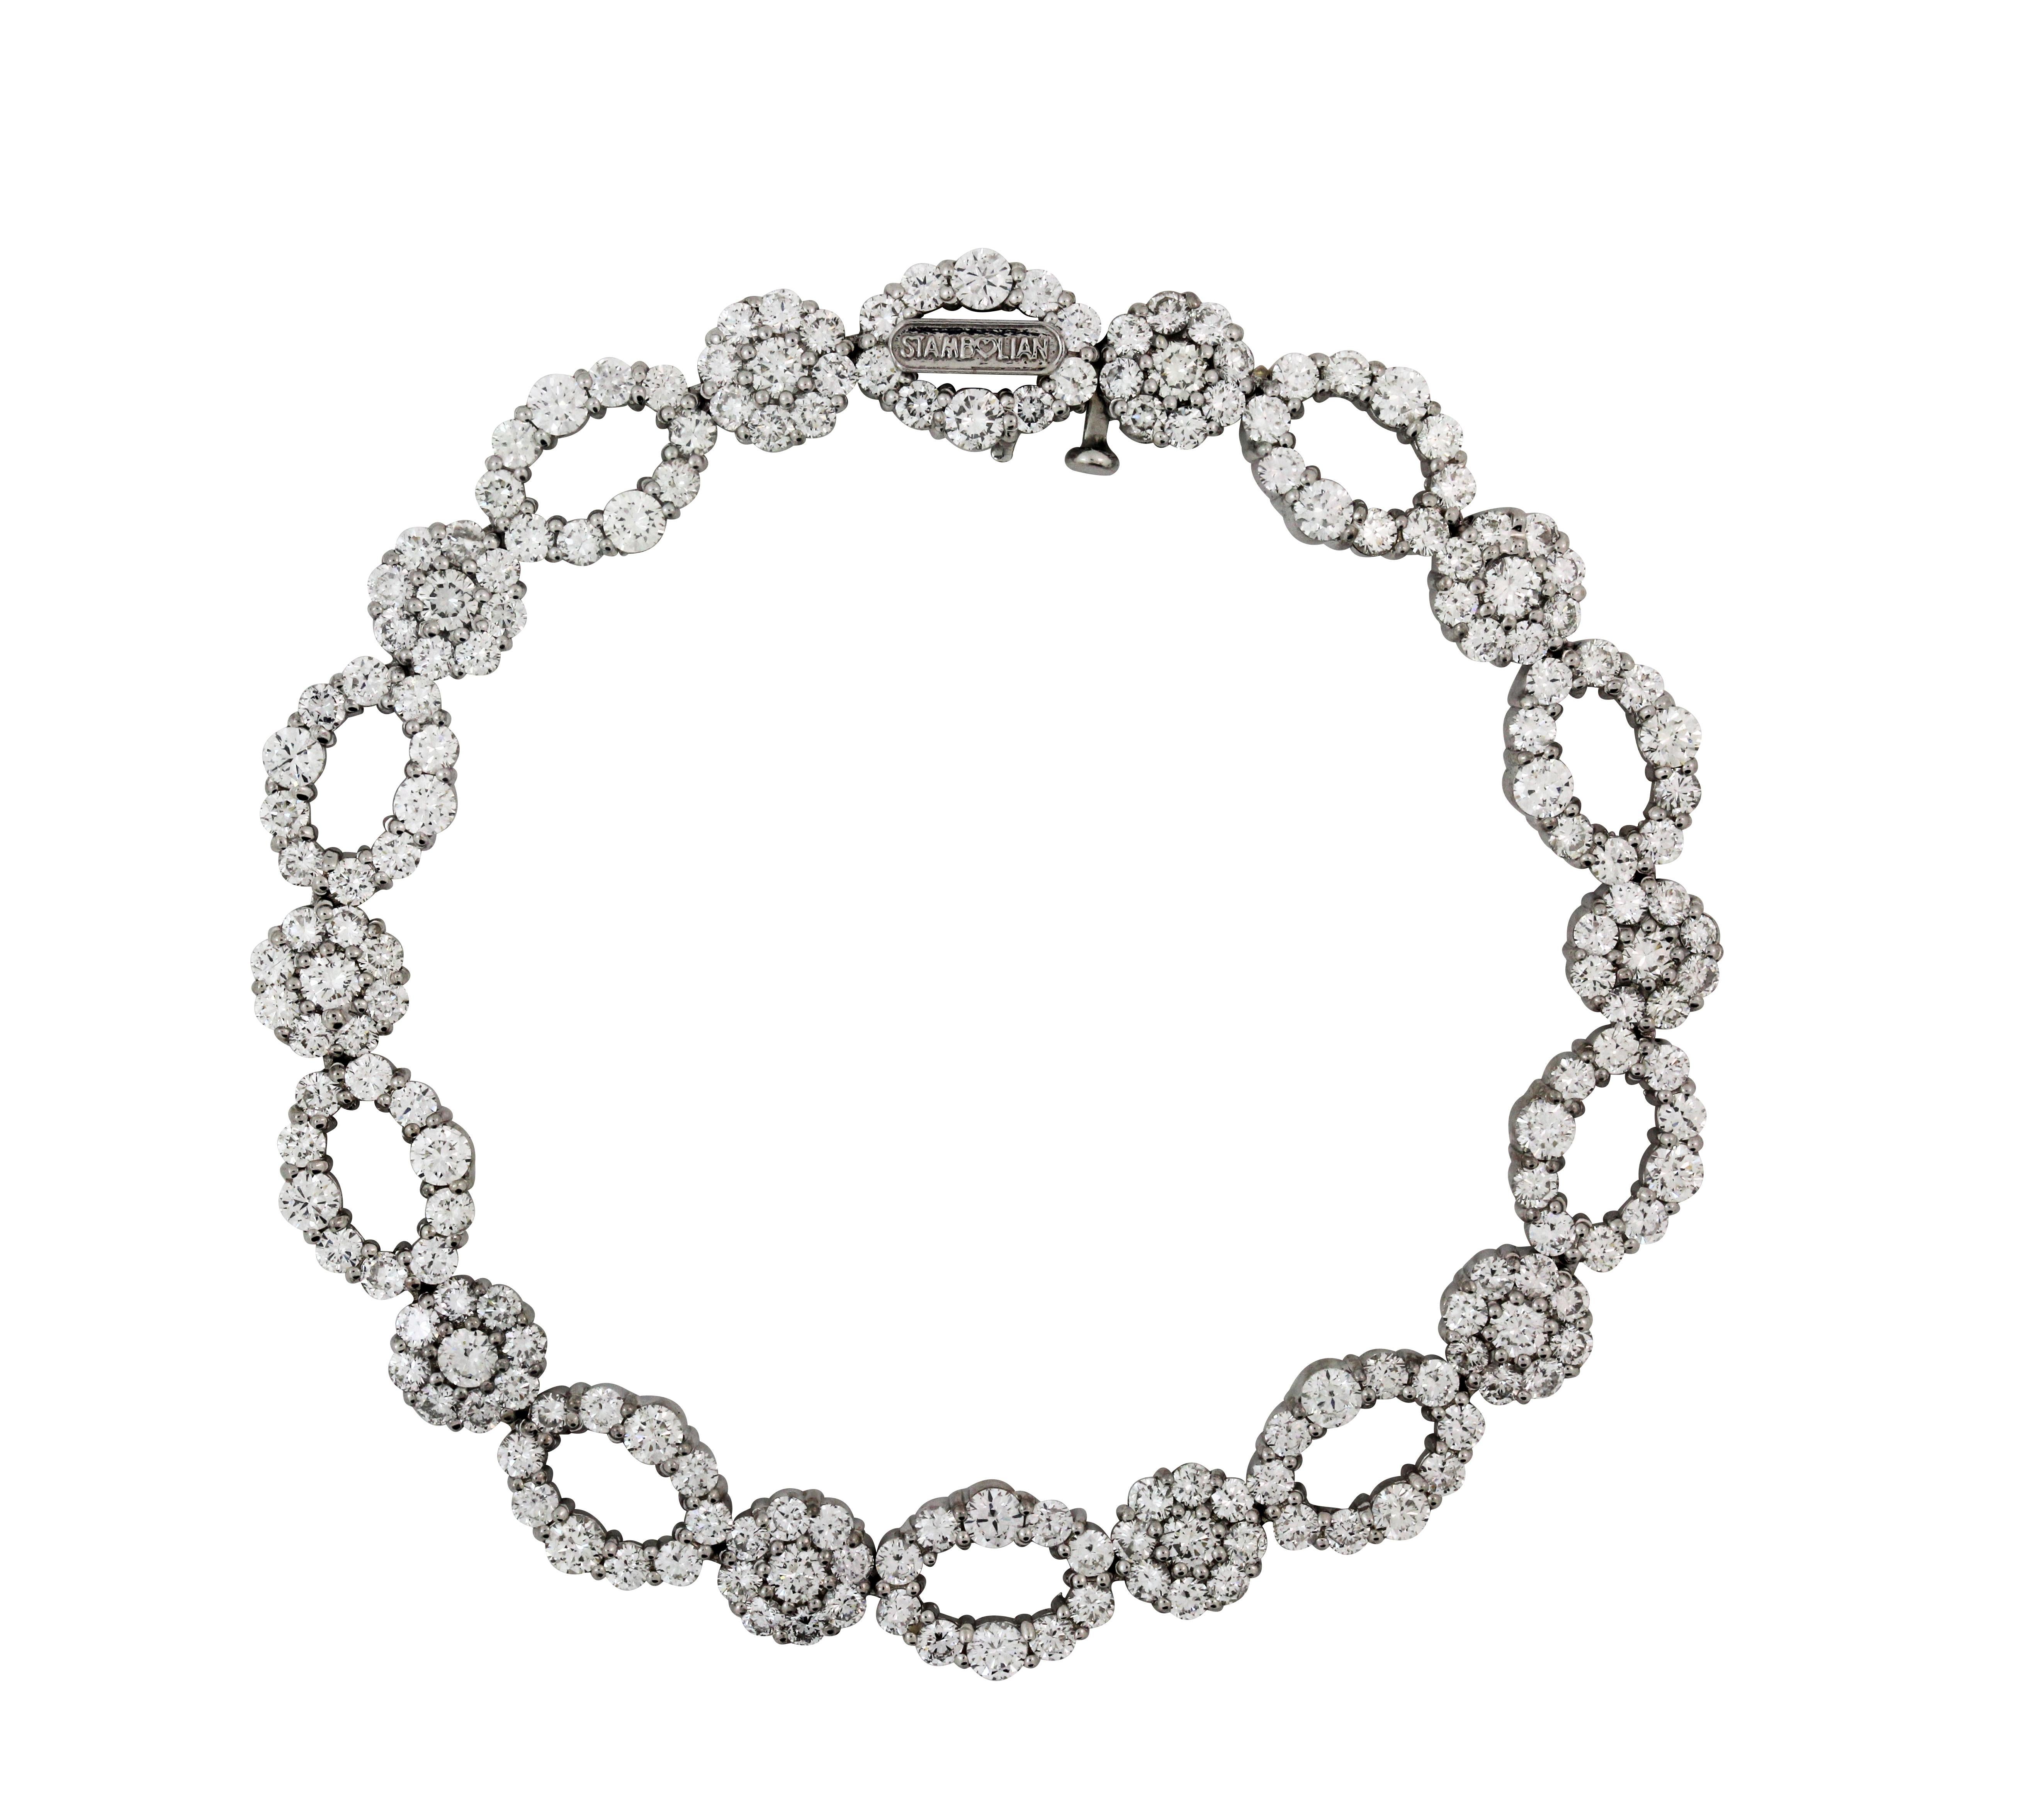 18K White Gold Link Bracelet with White Diamonds by Stambolian 

Bracelet has 8.76 carat G color, VS clarity white diamonds

Bracelet has a very secure clasp with safety underneath. 

Bracelet measures 7 inches in length x 0.5 inch width

Signed